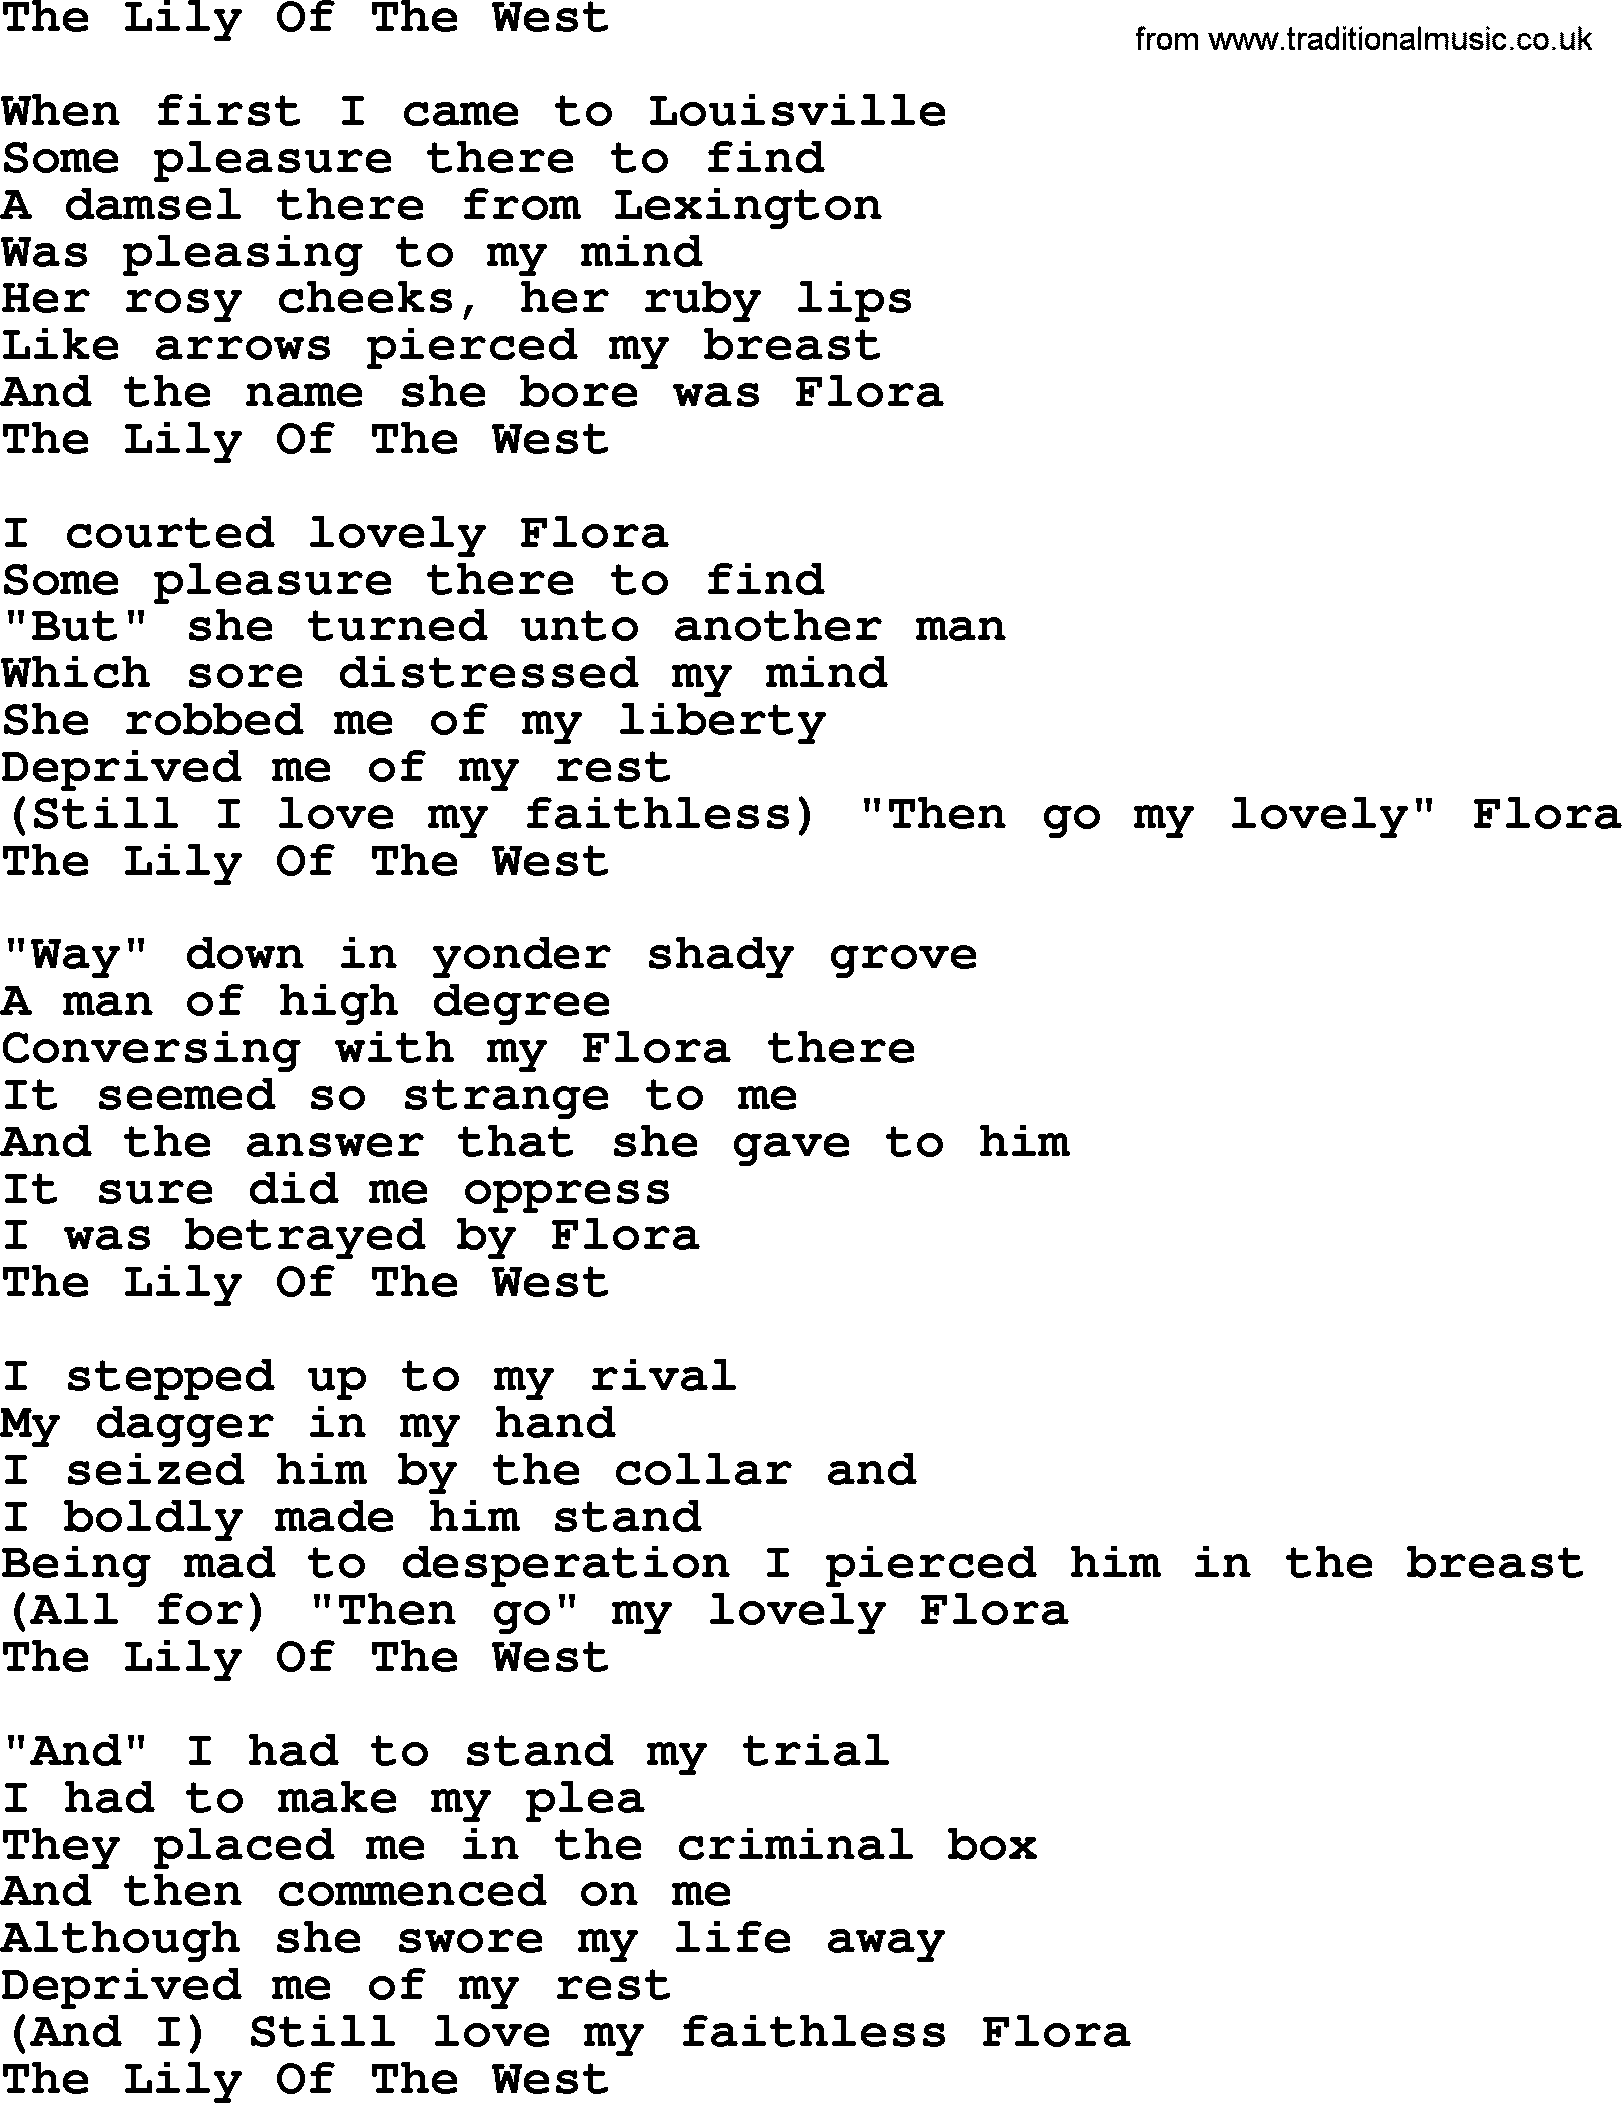 Joan Baez song The Lily Of The West, lyrics